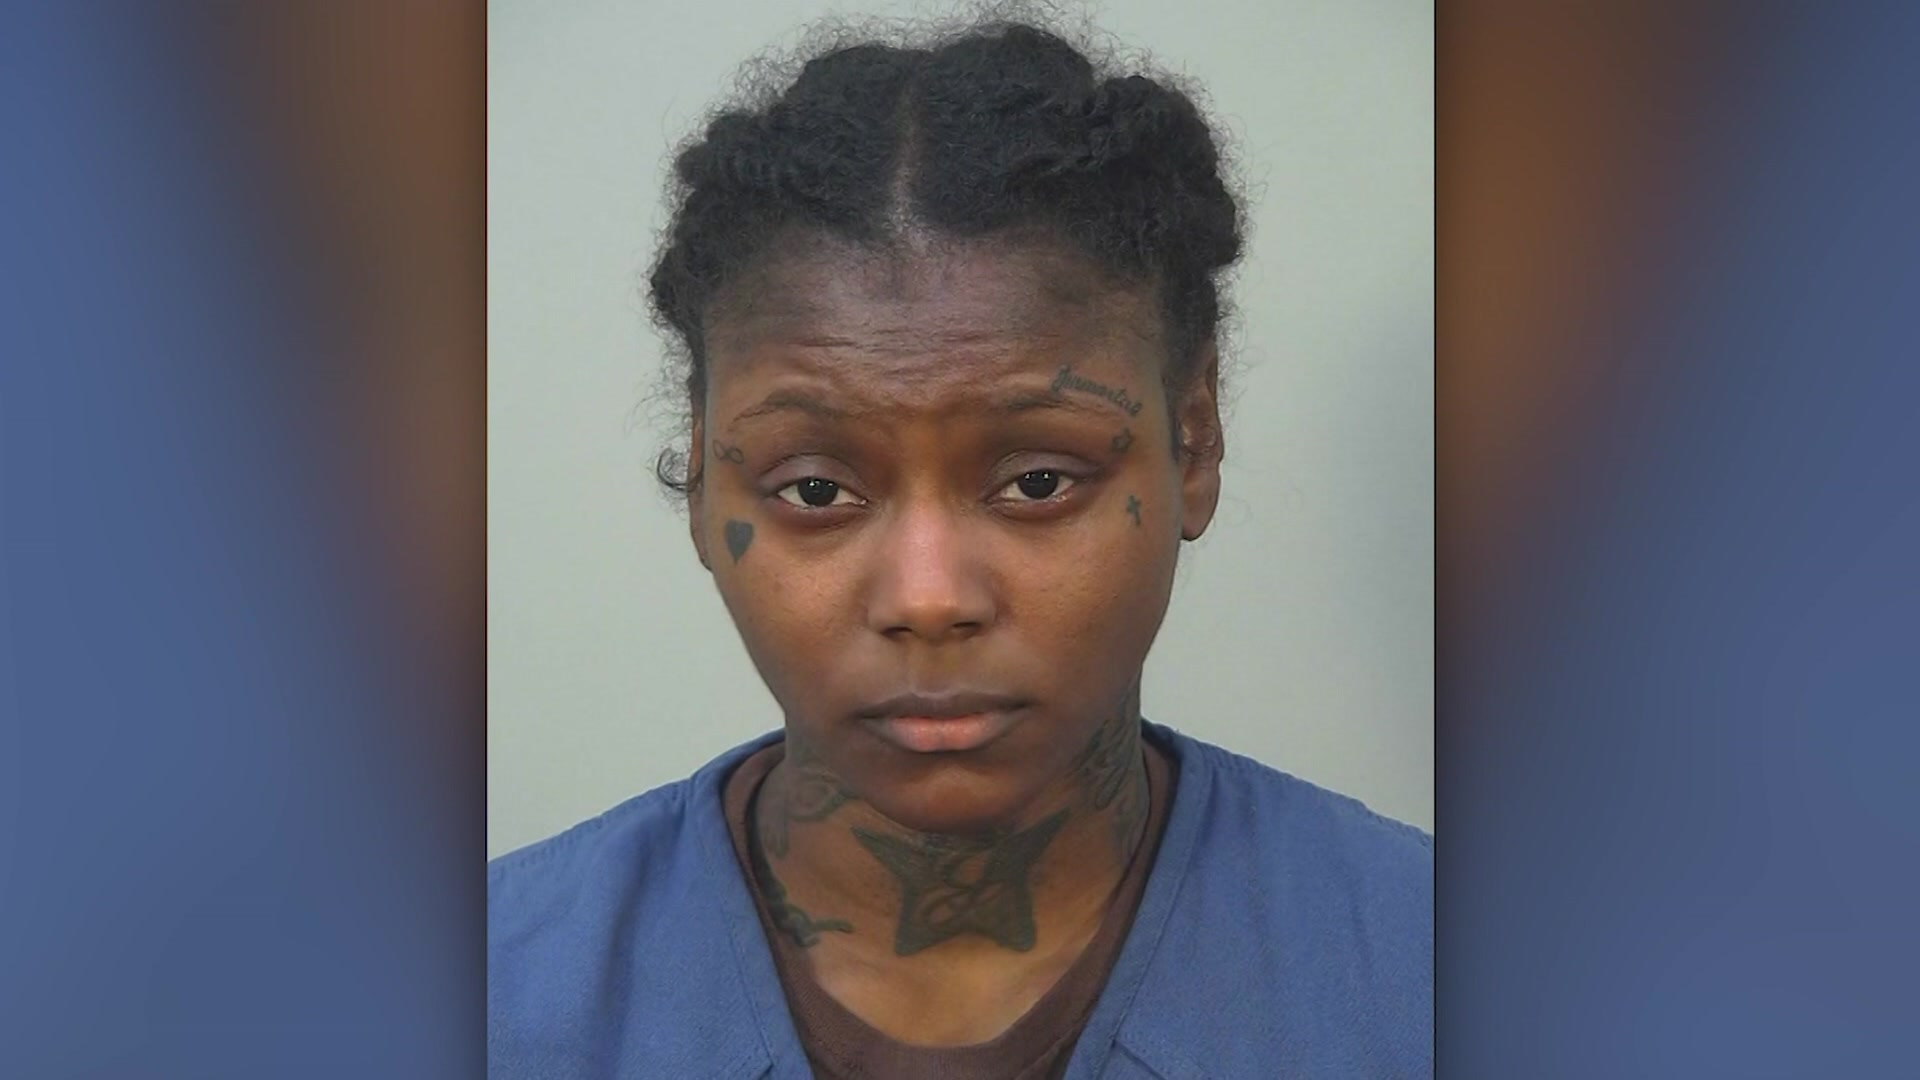 Booking photo for Jakira Anderson, charged with shooting and killing Kawsu Samba by 